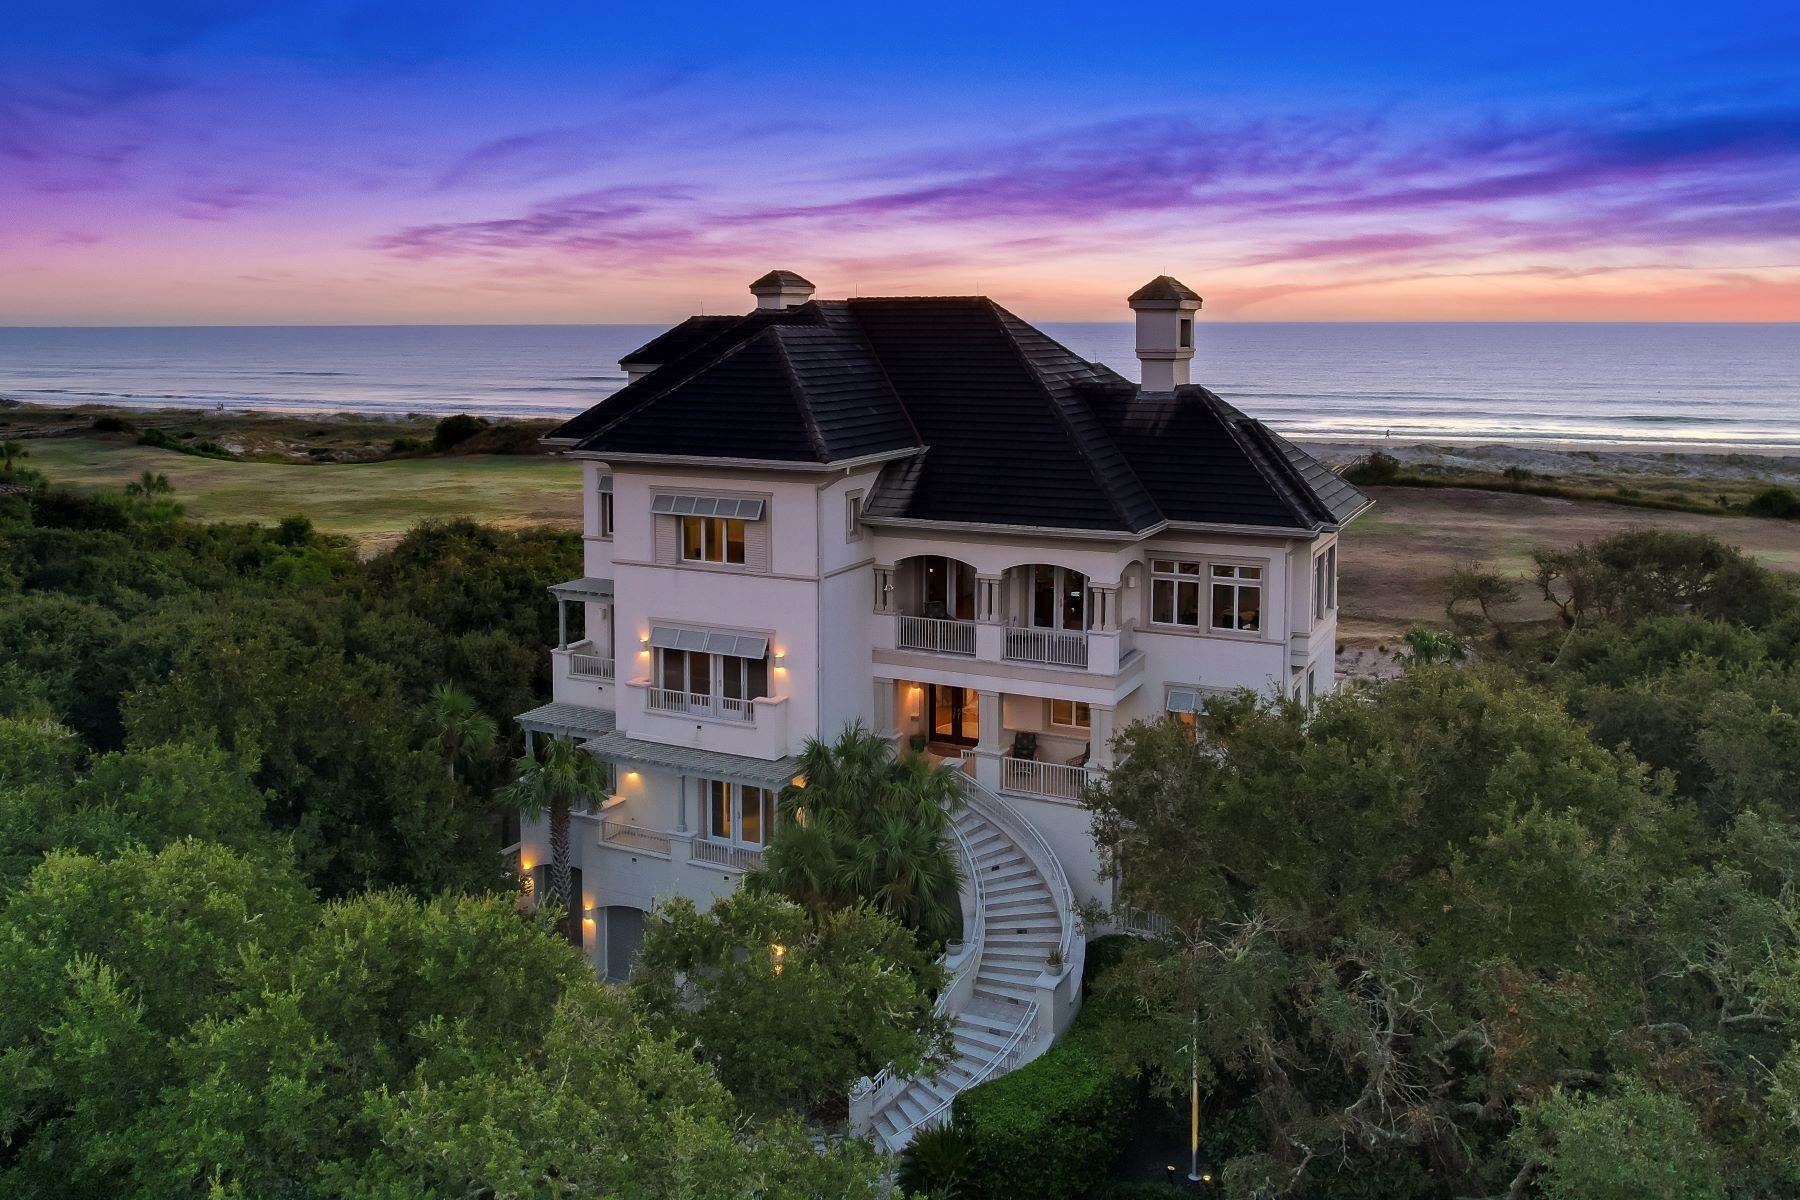 Property for Sale at 27 Ocean Club Drive, Amelia Island, FL 27 Ocean Club Drive Amelia Island, Florida 32034 United States